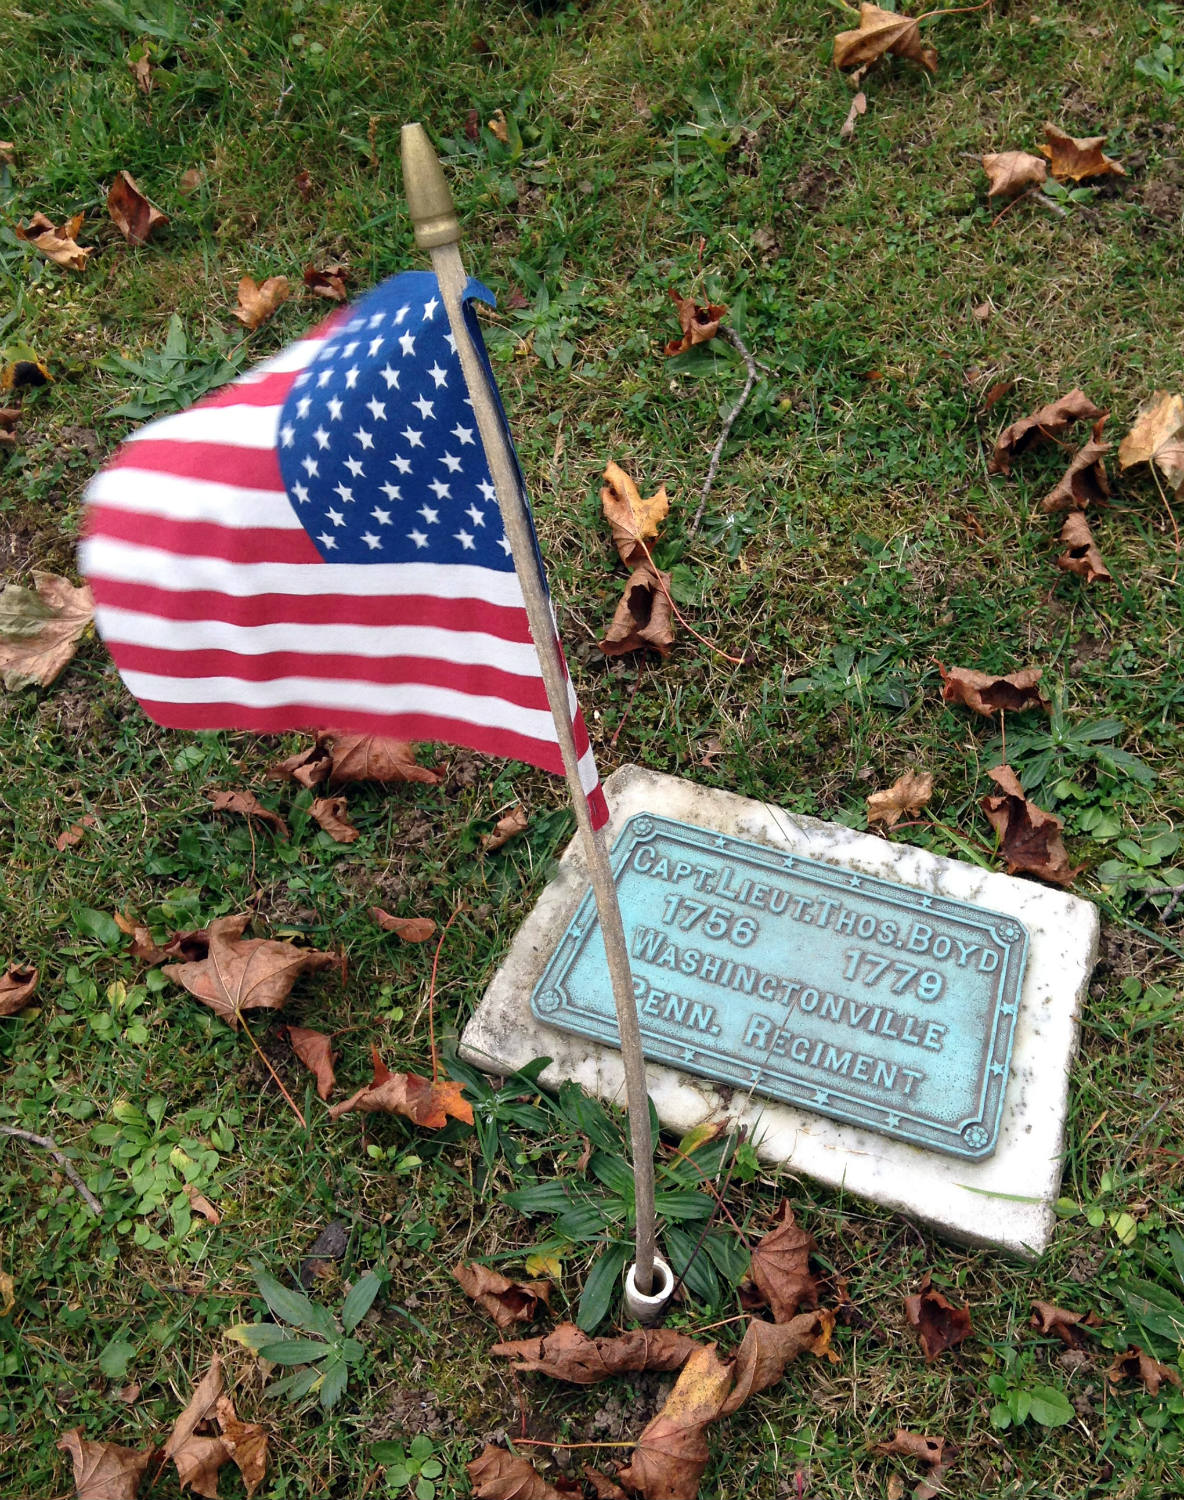 Memorial Marker for Lt. Boyd in Mt. Hope Cemetery in Rochester, NY